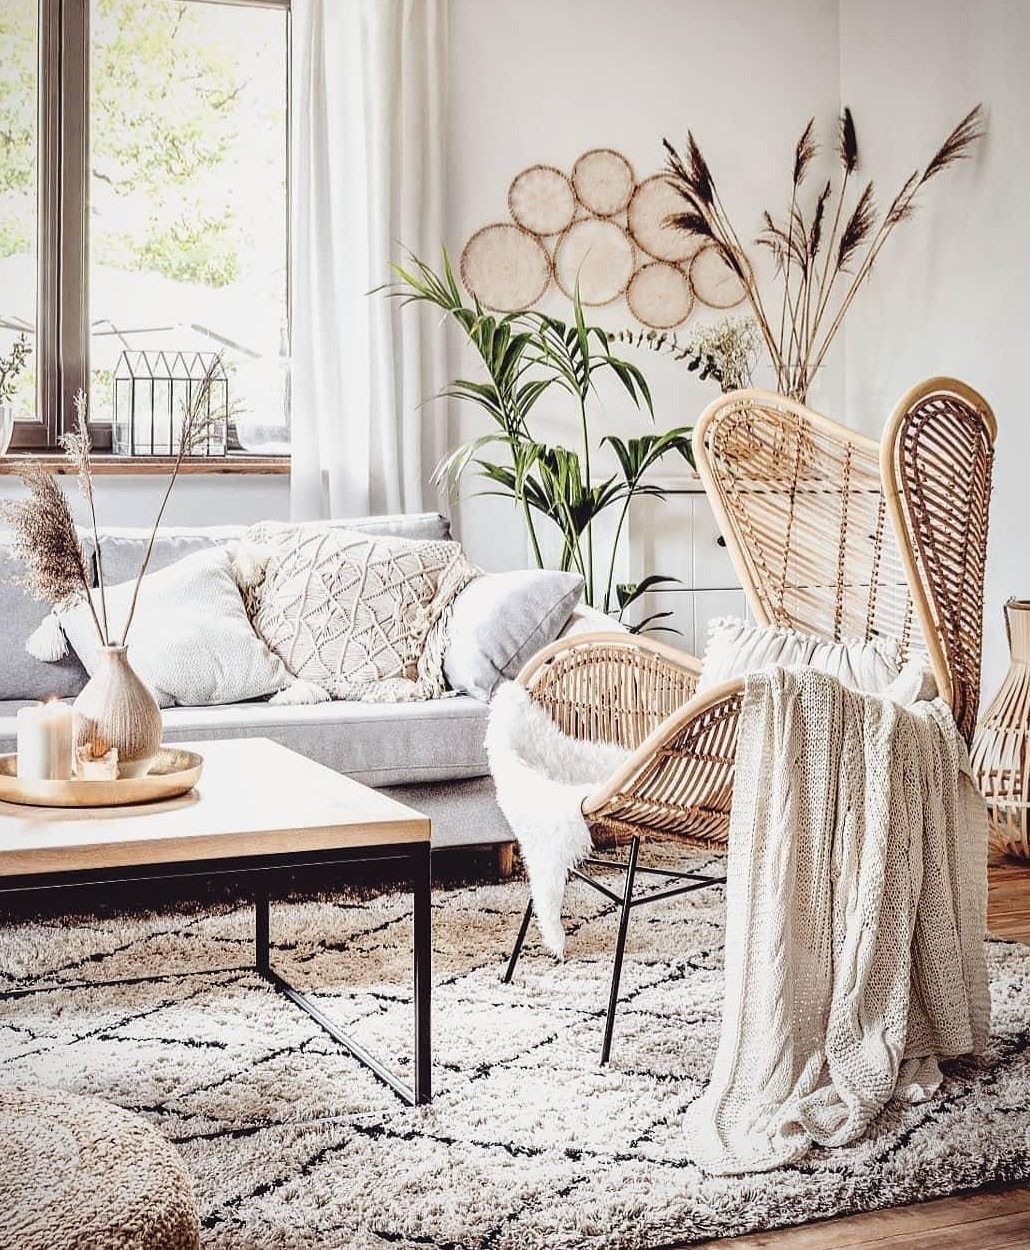 Combining Scandinavian Colors with Bohemian Accents